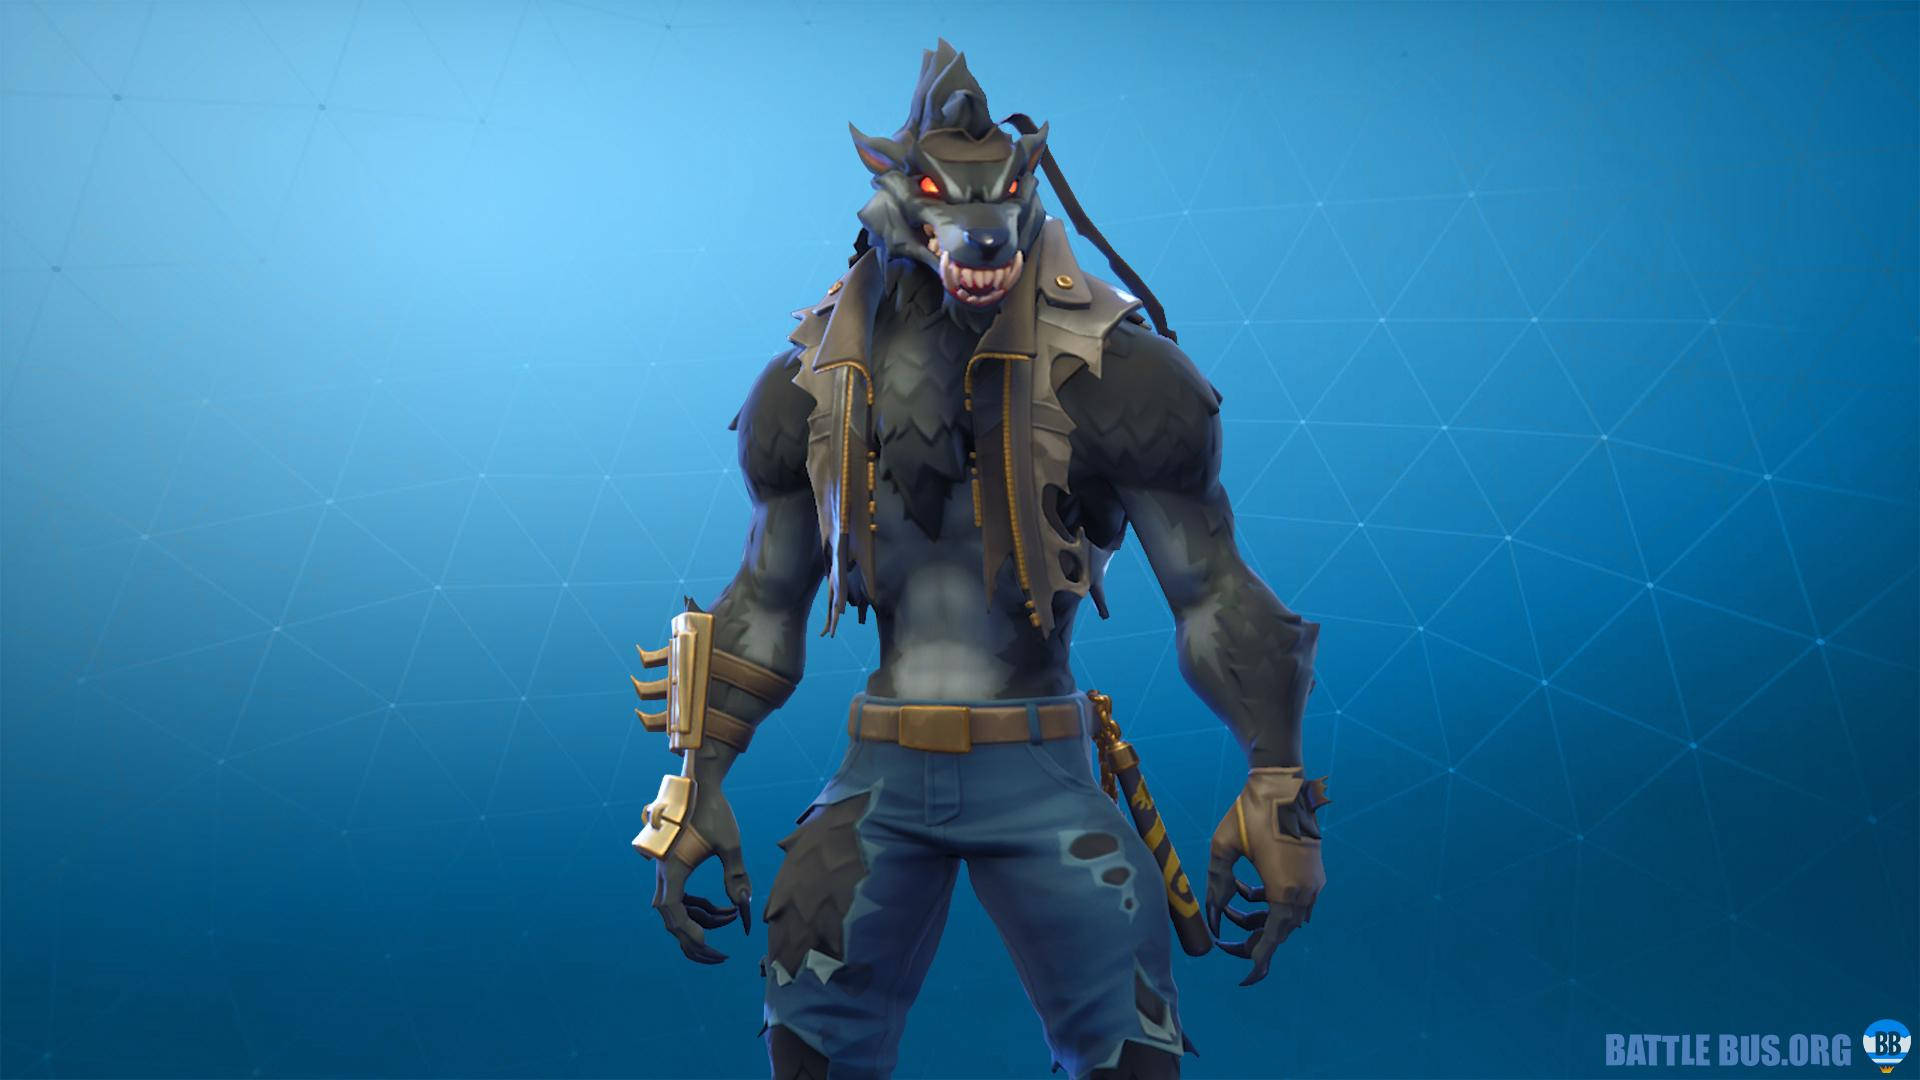 A Collection Of Rare And Iconic Og Fortnite Skins. Background